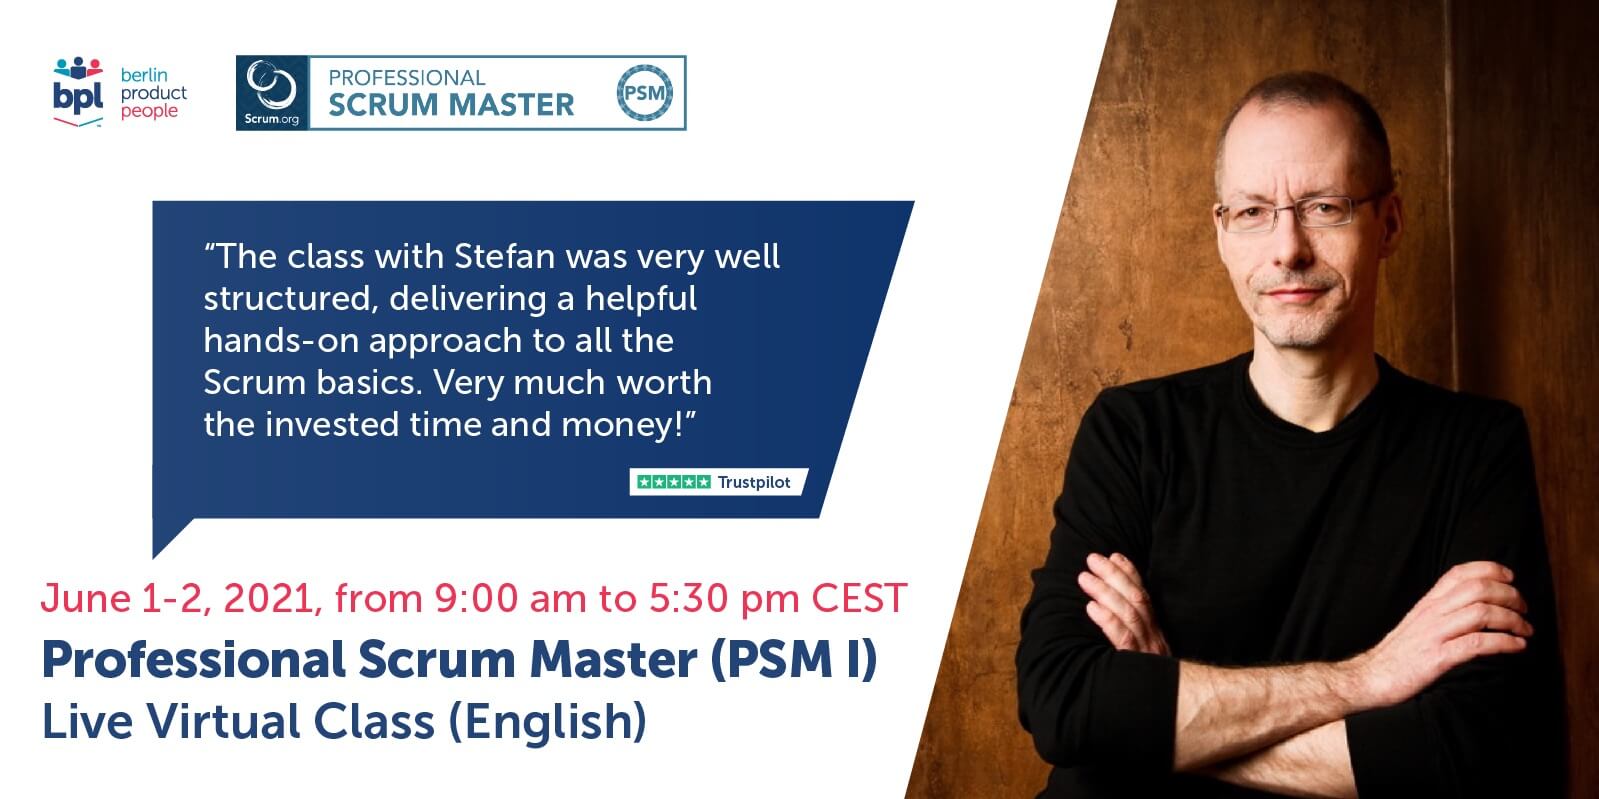 Professional Scrum Master Online Training w/ PSM Certificate — June 1-2, 2021 — Berlin Product People GmbH